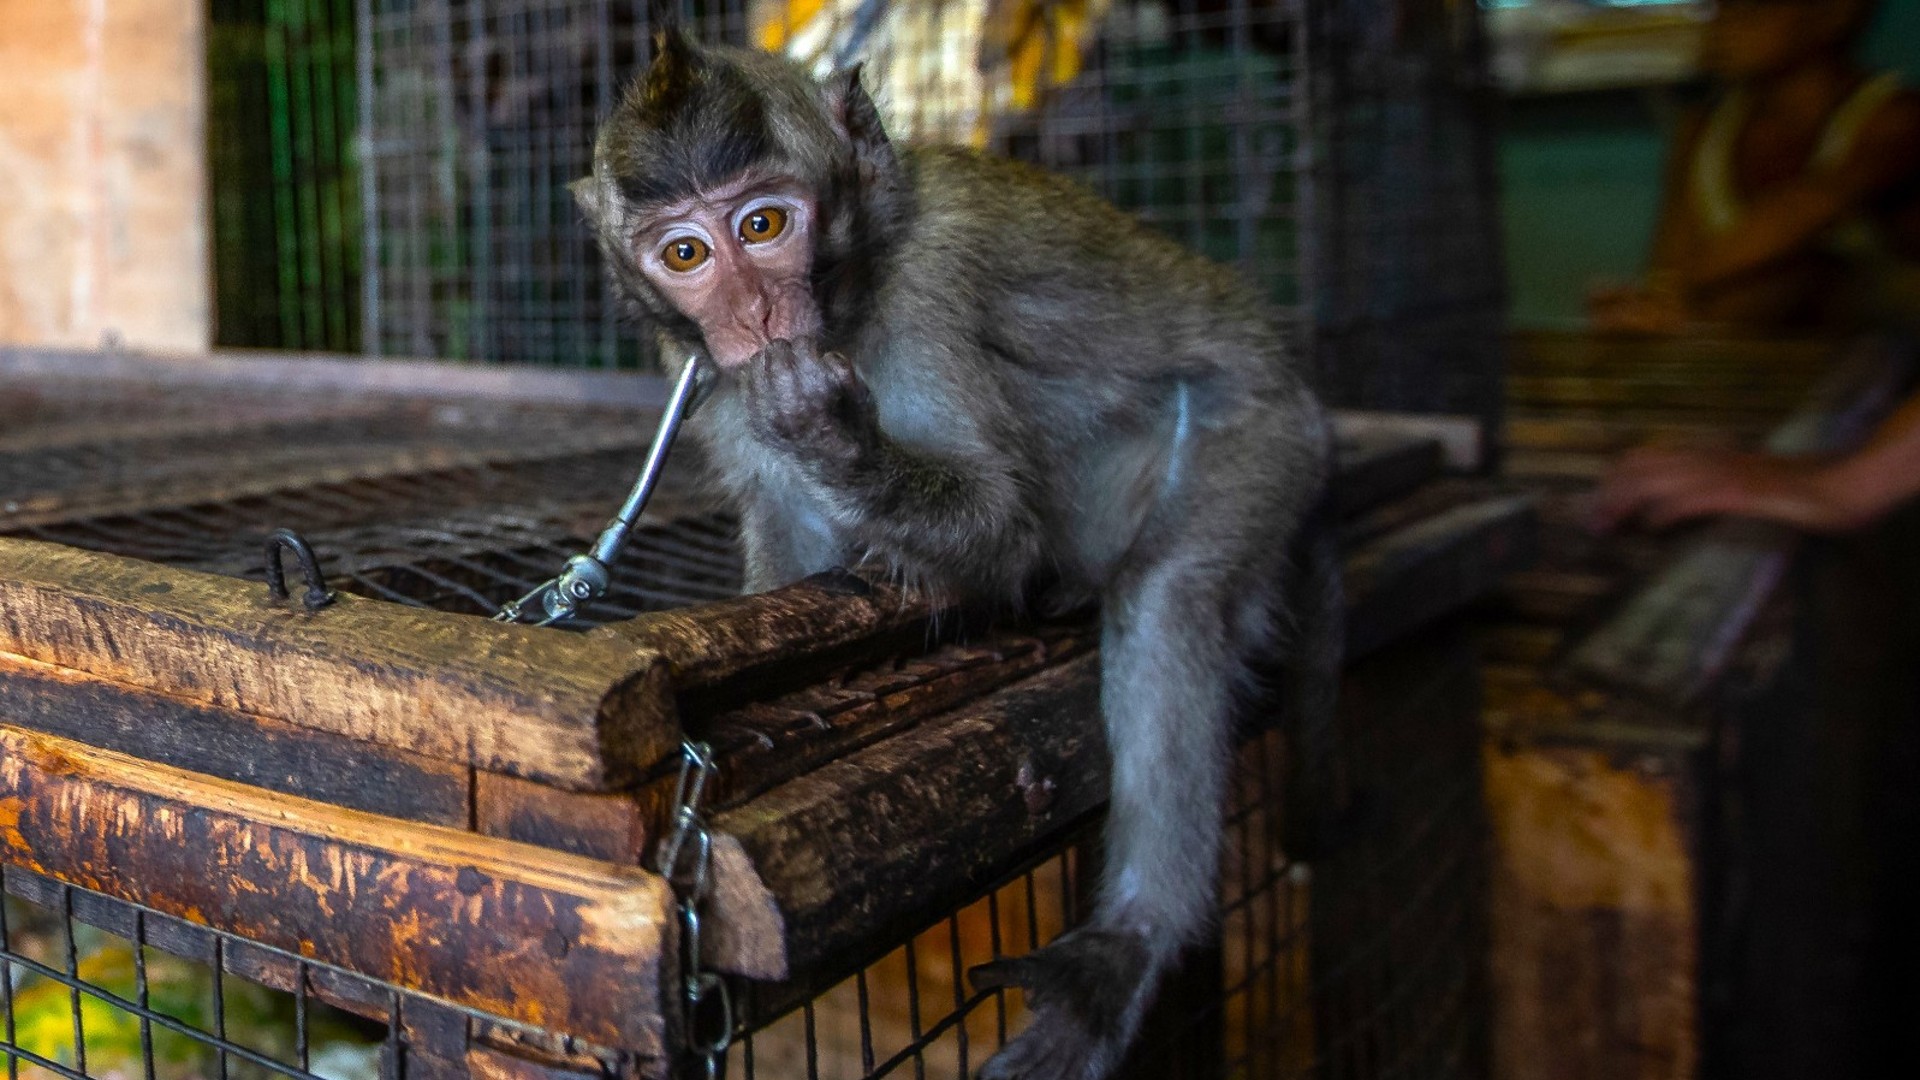 A monkey with a chain around its neck sits on top of a cage